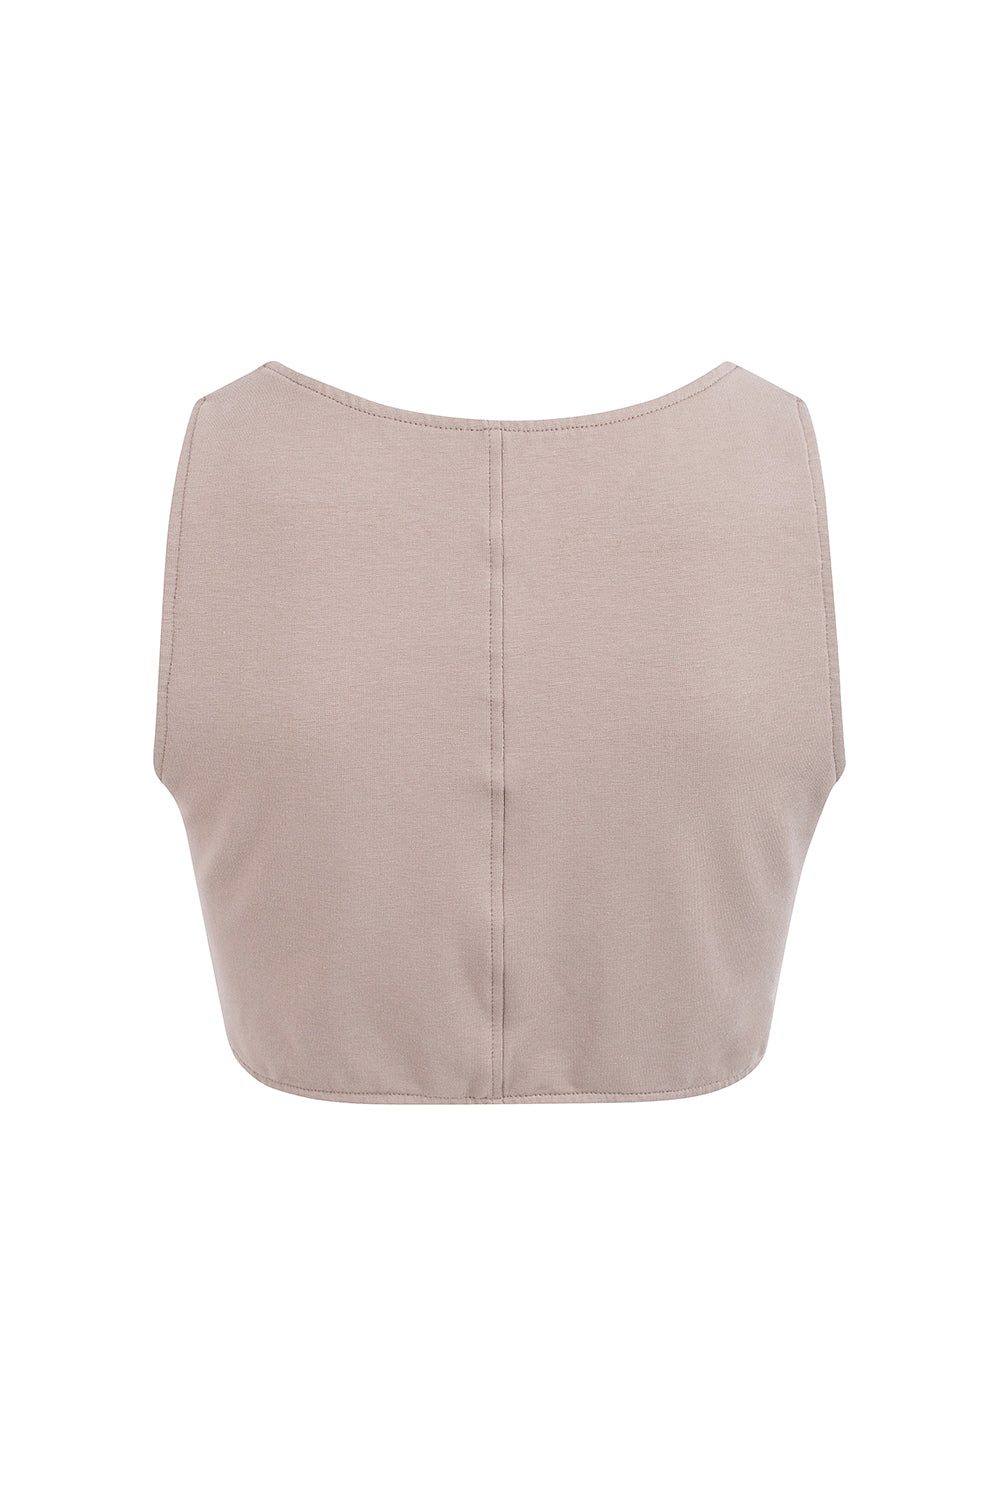 TAUPE TRACKSUIT CROP TOP